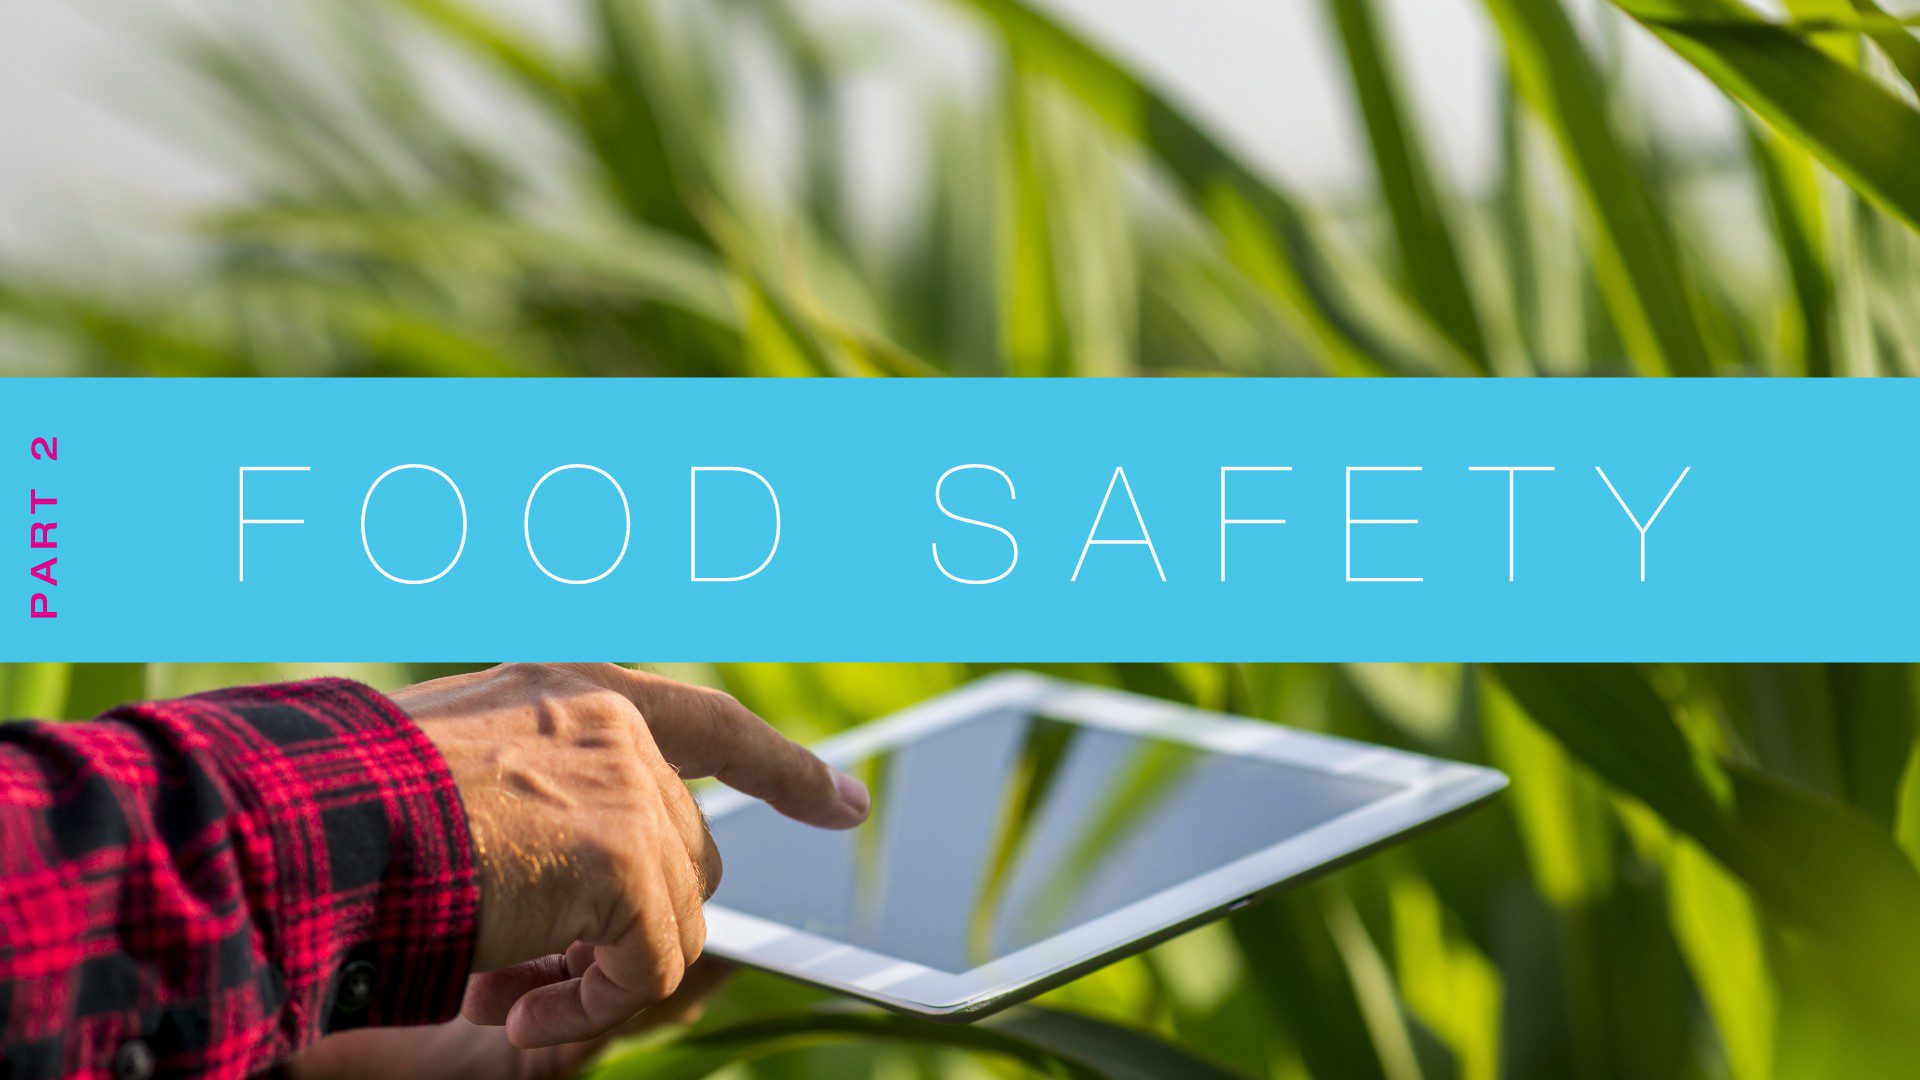 Having trouble selling food safety solutions? Read this — it will help.